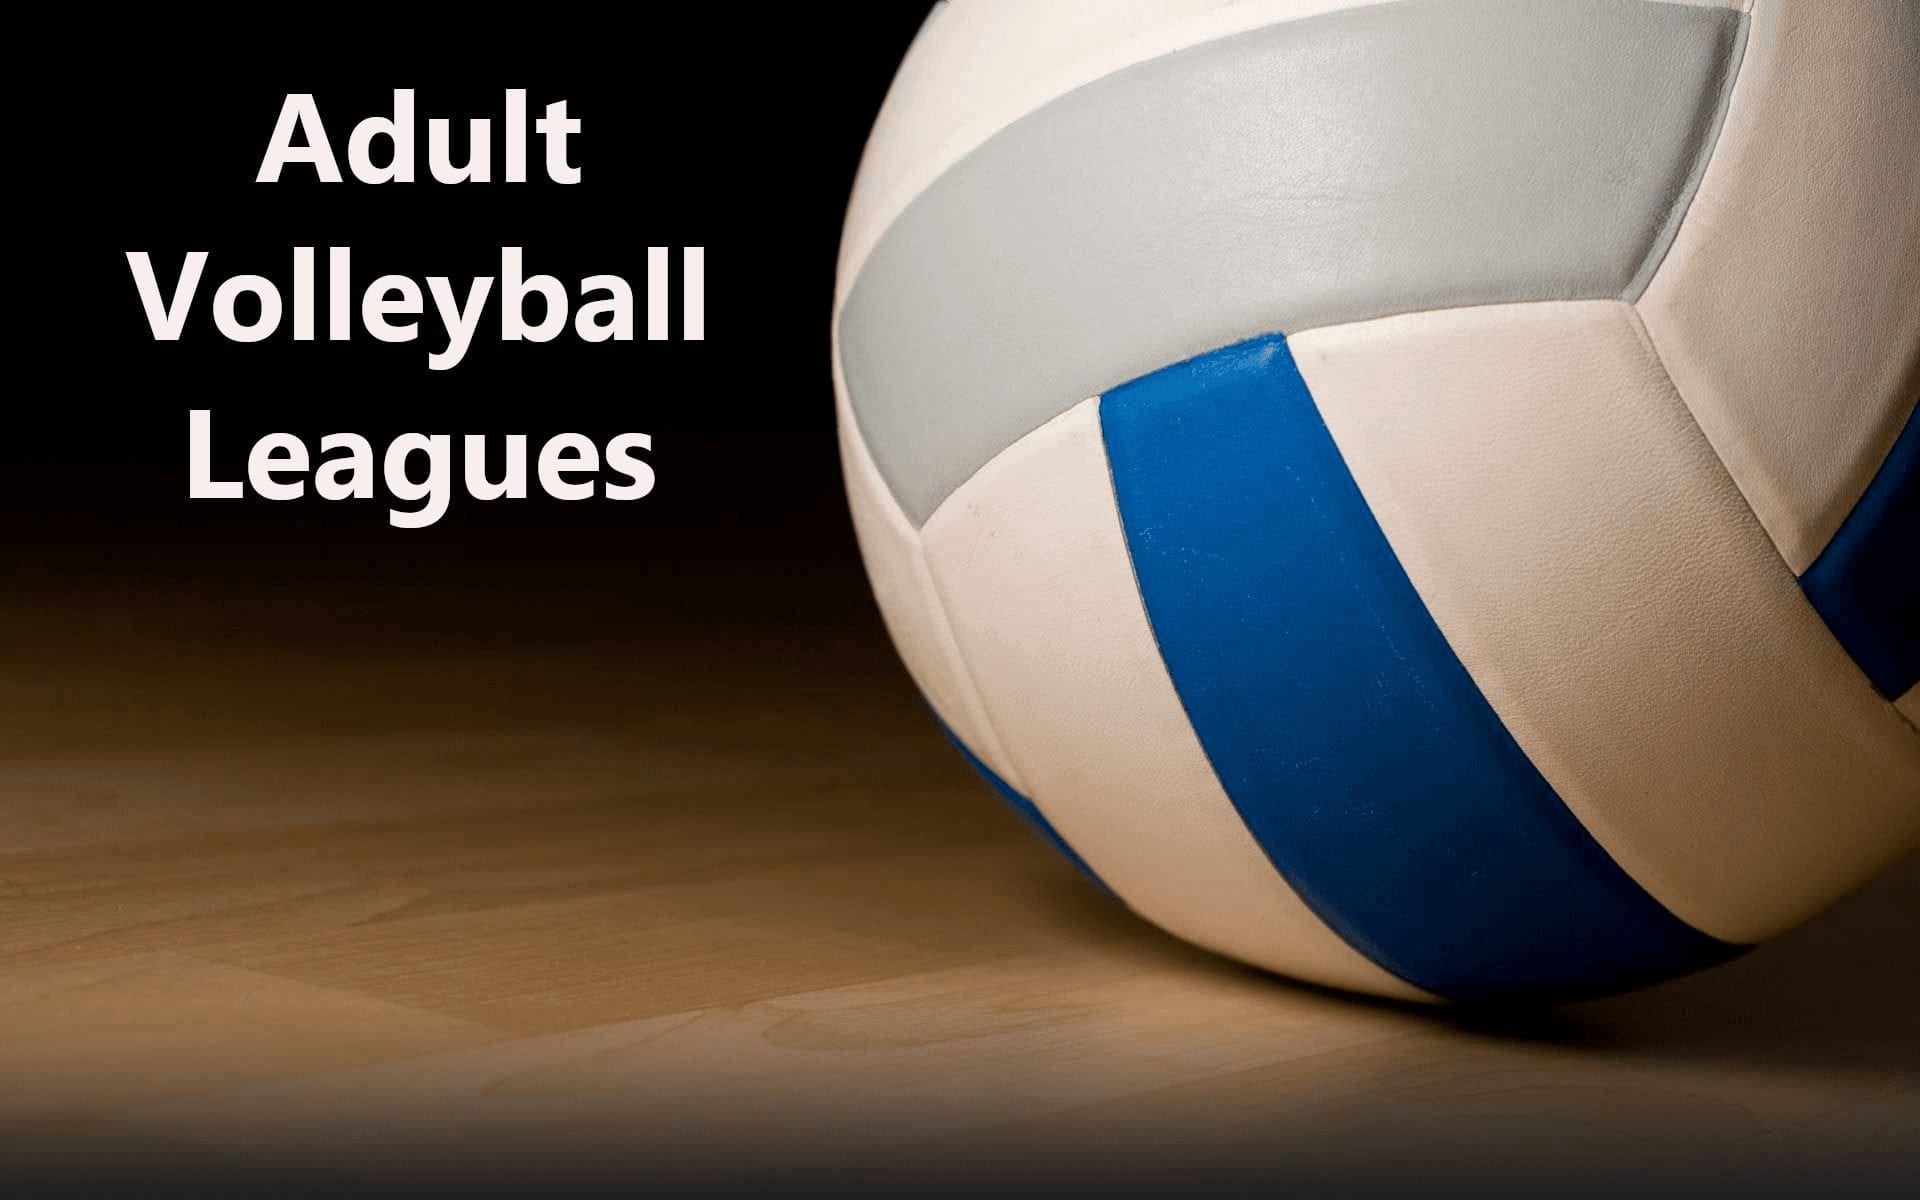 Registration underway for winter adult volleyball leagues